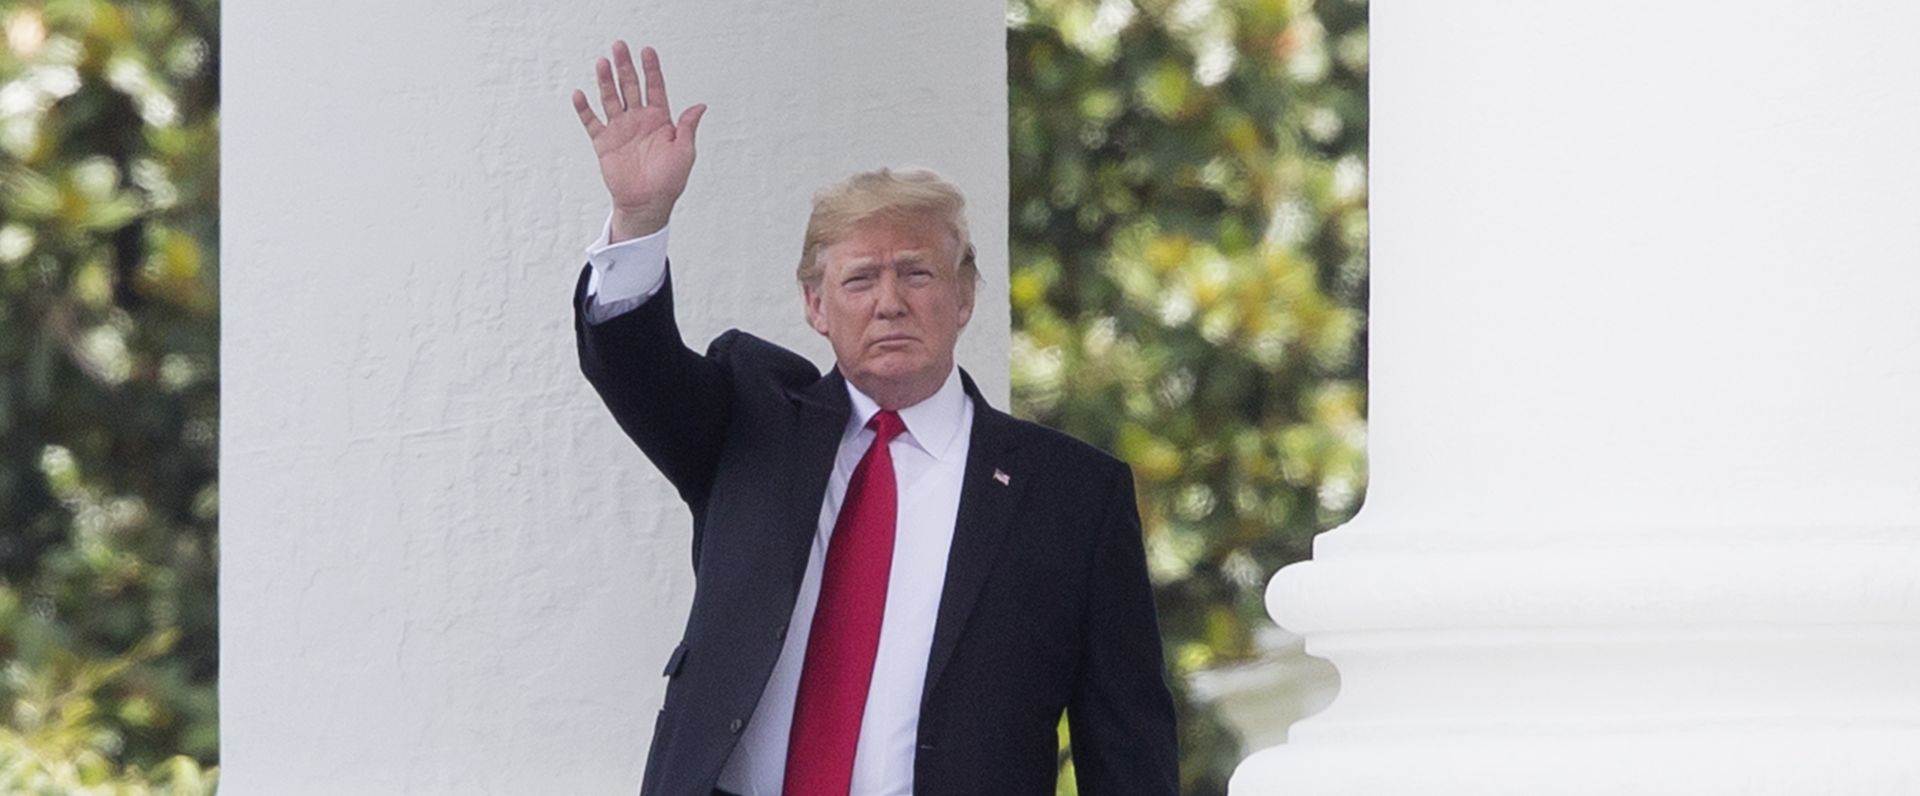 epa06866349 US President Donald J. Trump waves from the North Portico before departing the White House in Washington, DC, USA, 05 July 2018. Trump travels to Montana to attend a rally.  EPA/MICHAEL REYNOLDS